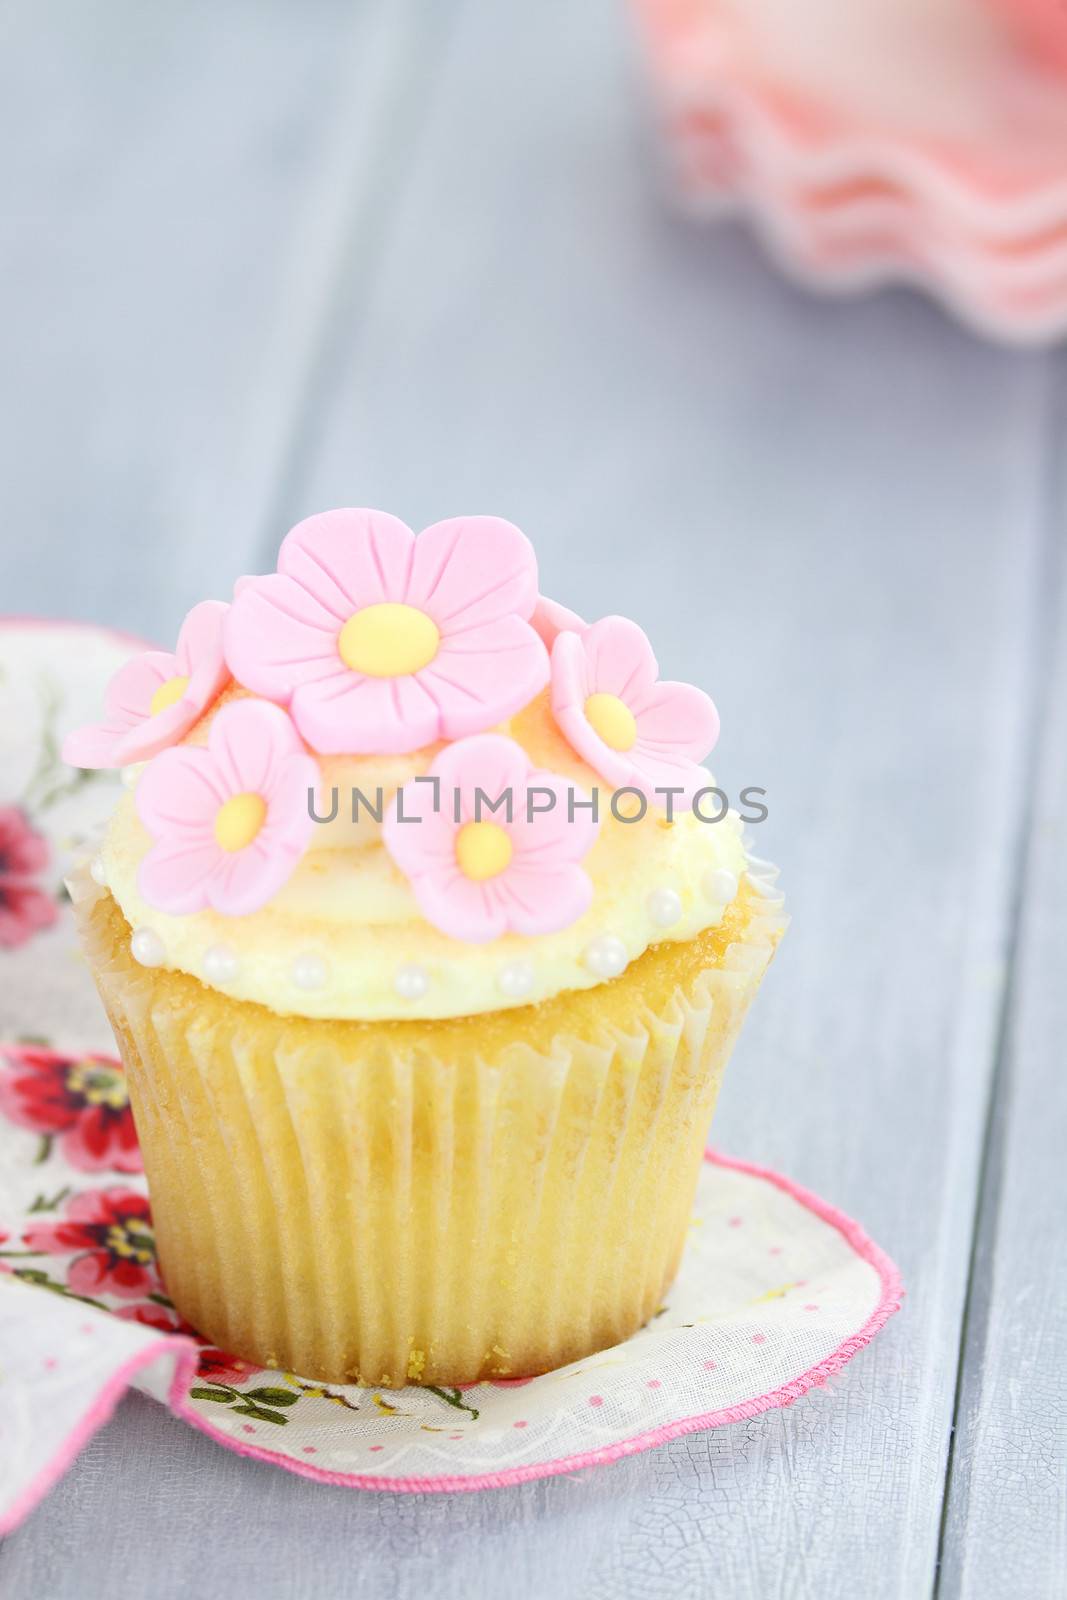 Pretty yellow and pink cupcake with extreme shallow depth of field.